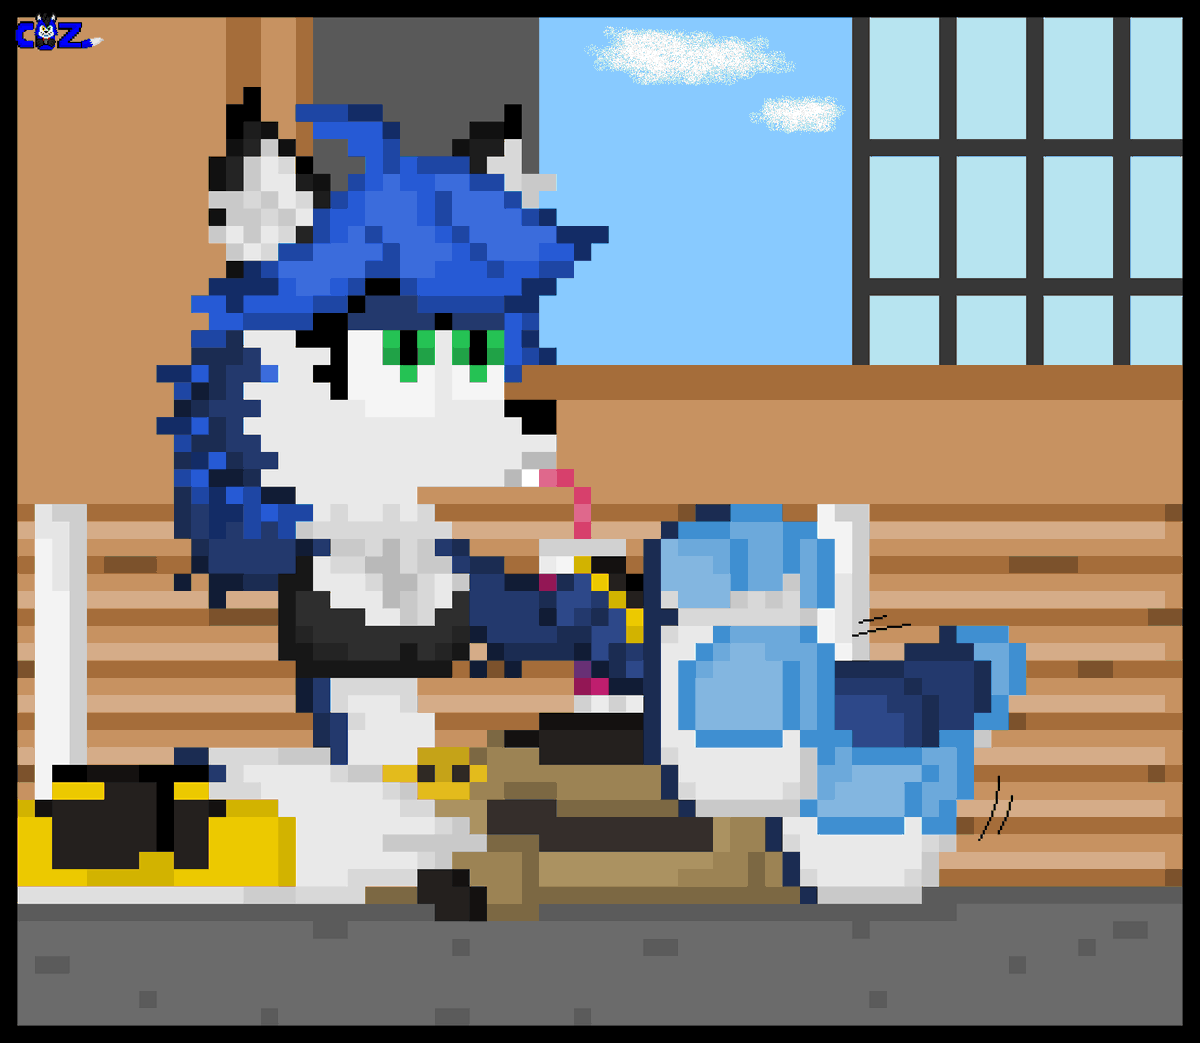 Kala was working hard on sight, so she got herself a smoothie to refresh herself, also letting her hot paws air out to. Everyone's got to let their paws out on the job sometimes am I right?